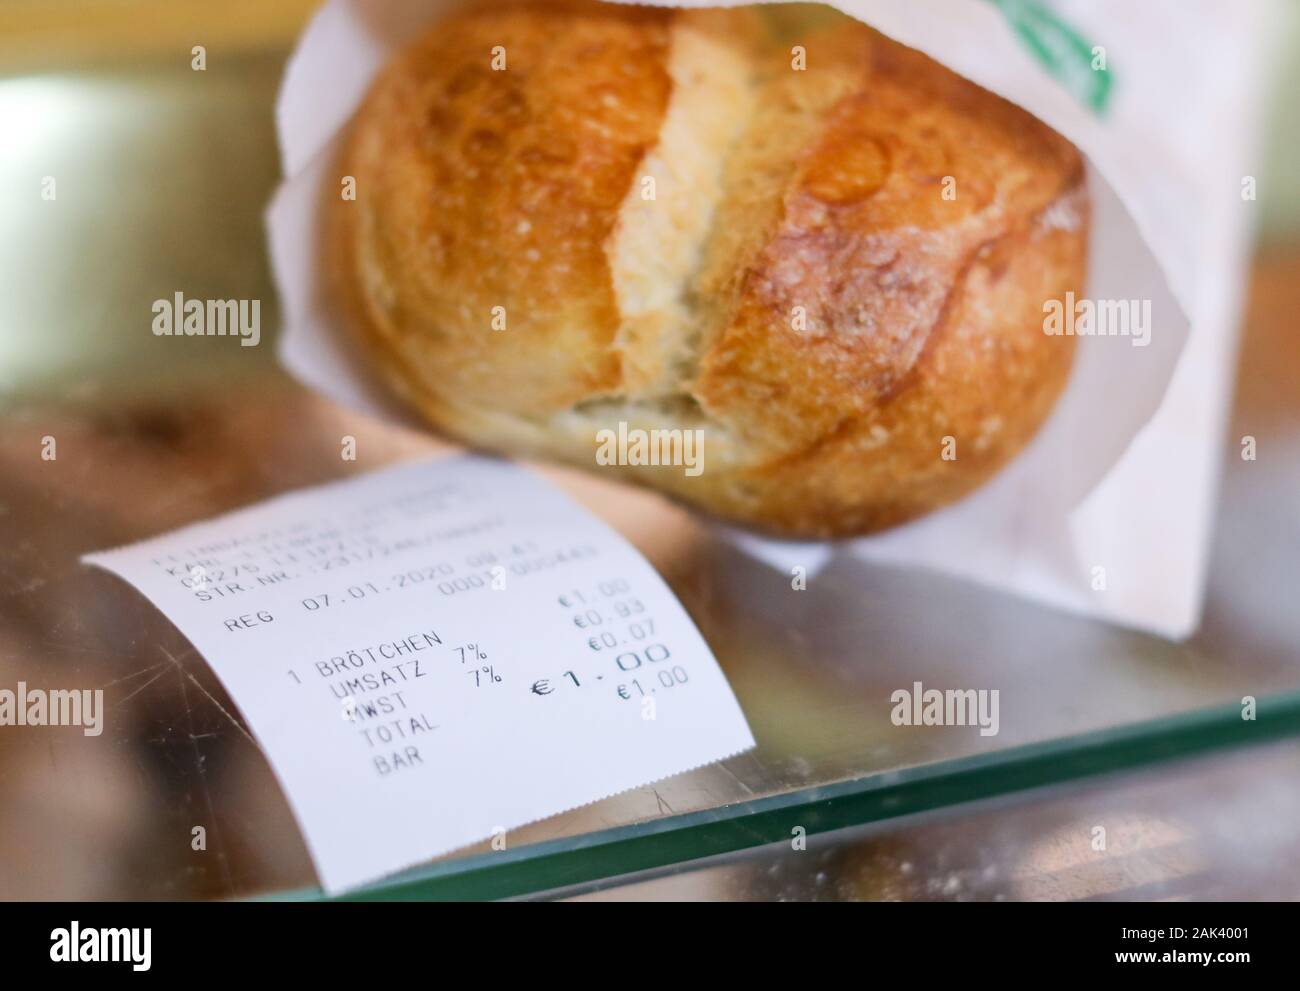 07 January 2020, Saxony, Leipzig: A bread roll and the corresponding receipt are lying on the counter of a pastry shop. Just a few days after the controversial obligation to pay receipts came into force, the regulation has met with criticism, especially from bakeries. Customers would not take the vouchers with them and the bakeries would have to throw away the freshly printed voucher right away, according to representatives of the bakers' guild. Since 1 January, merchants have had to hand over a receipt to their customers. The law on cash registers passed in 2016 is intended to combat tax frau Stock Photo